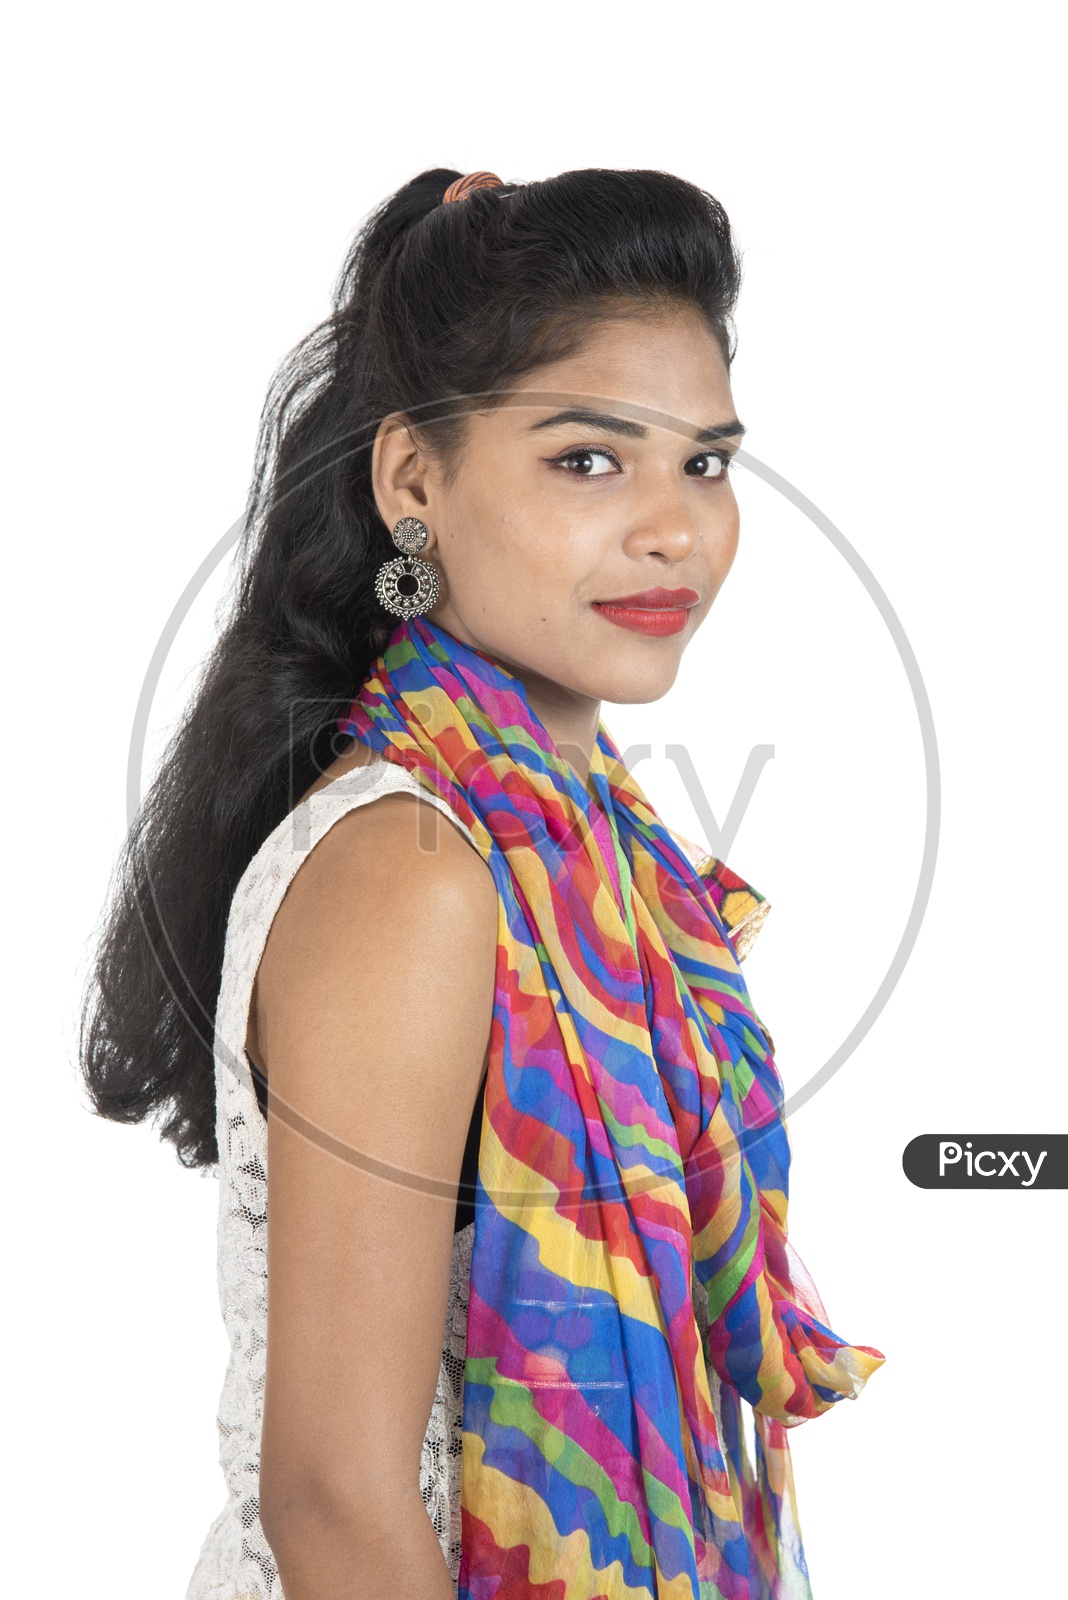 A Happy Young Indian Girl With A Smiling Face over a White Background